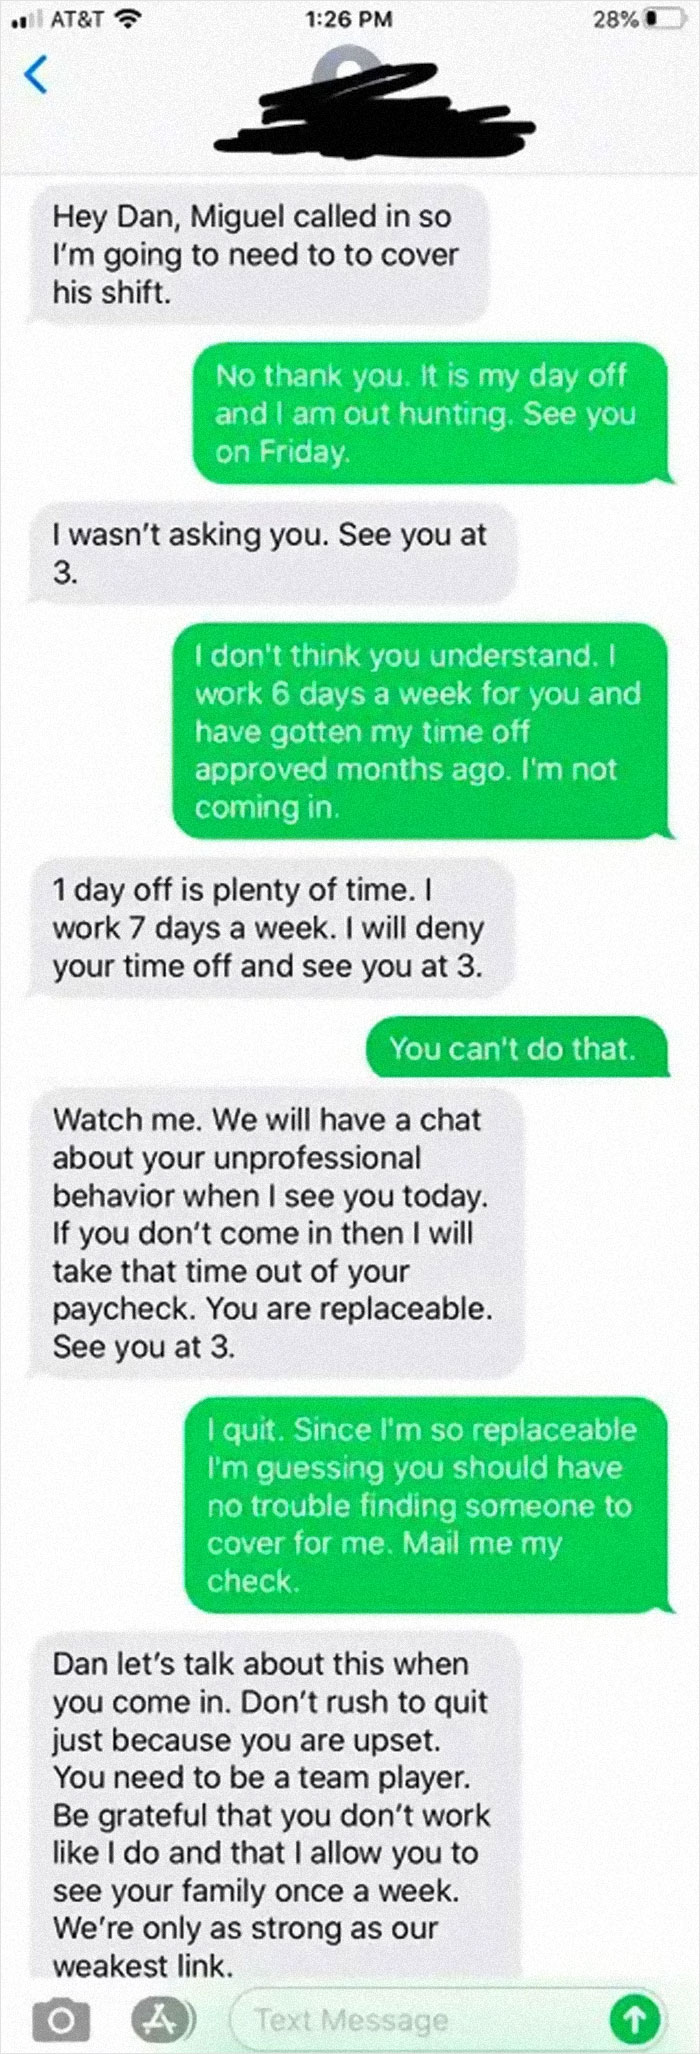 Boss Wanted Me To Come In On Days That I Requested Off. Then Threatened Me When I Said No